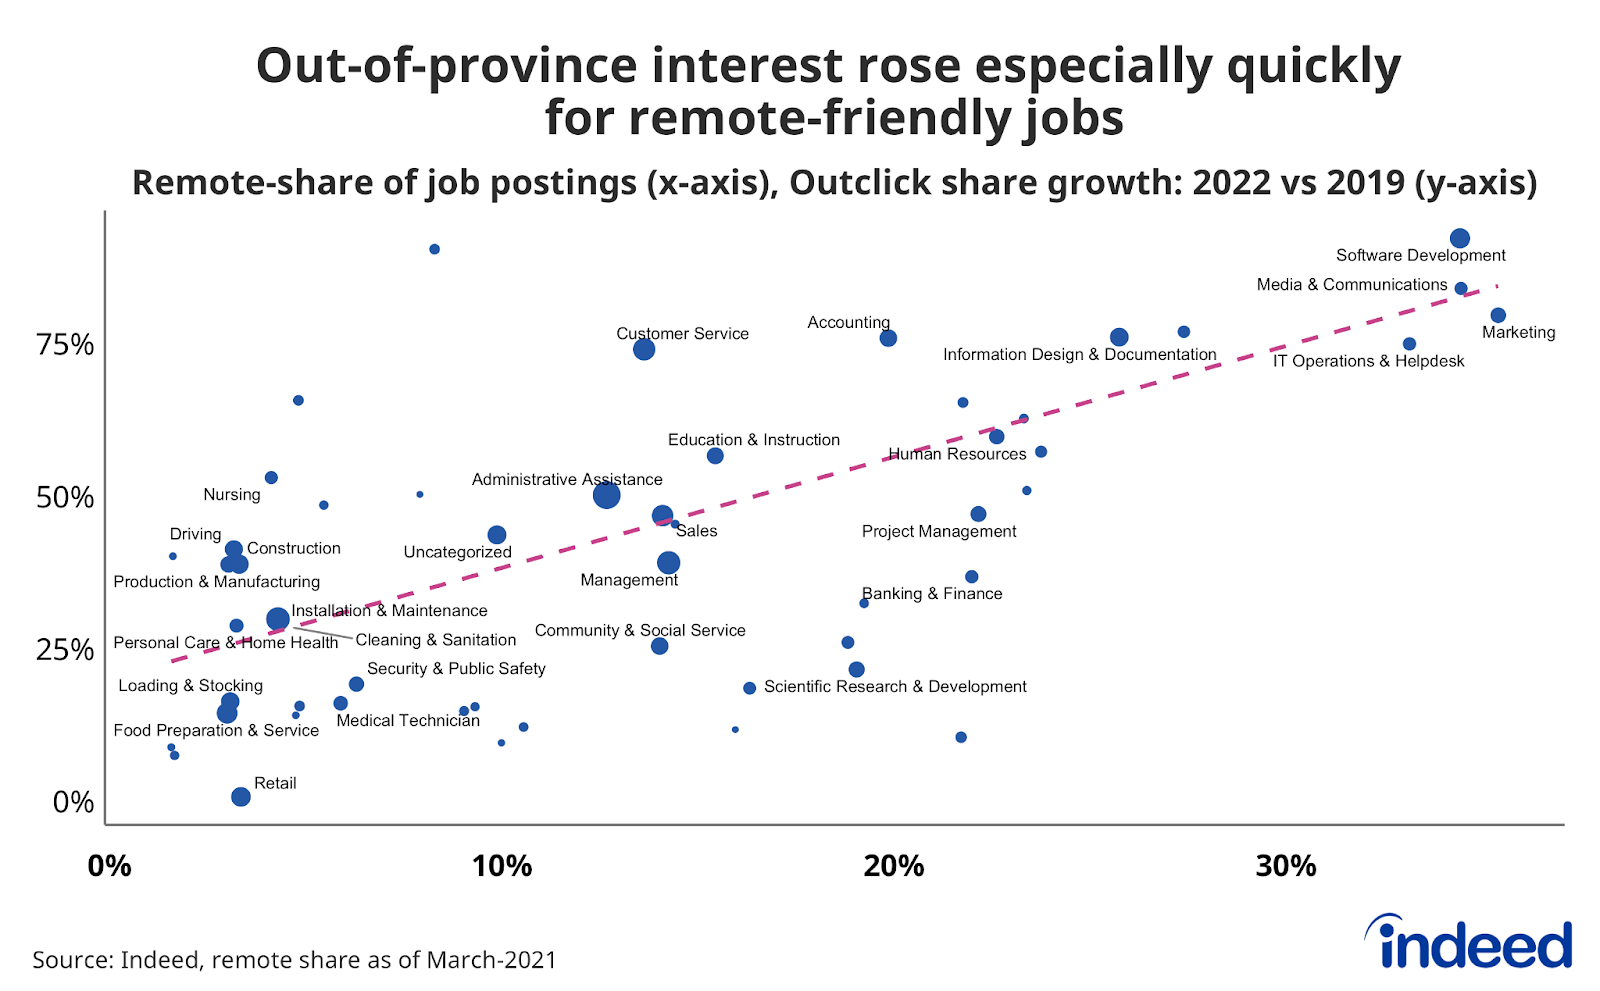 Scatter plot entitled “Out-of-province interest rose especially quickly for remote-friendly jobs.”